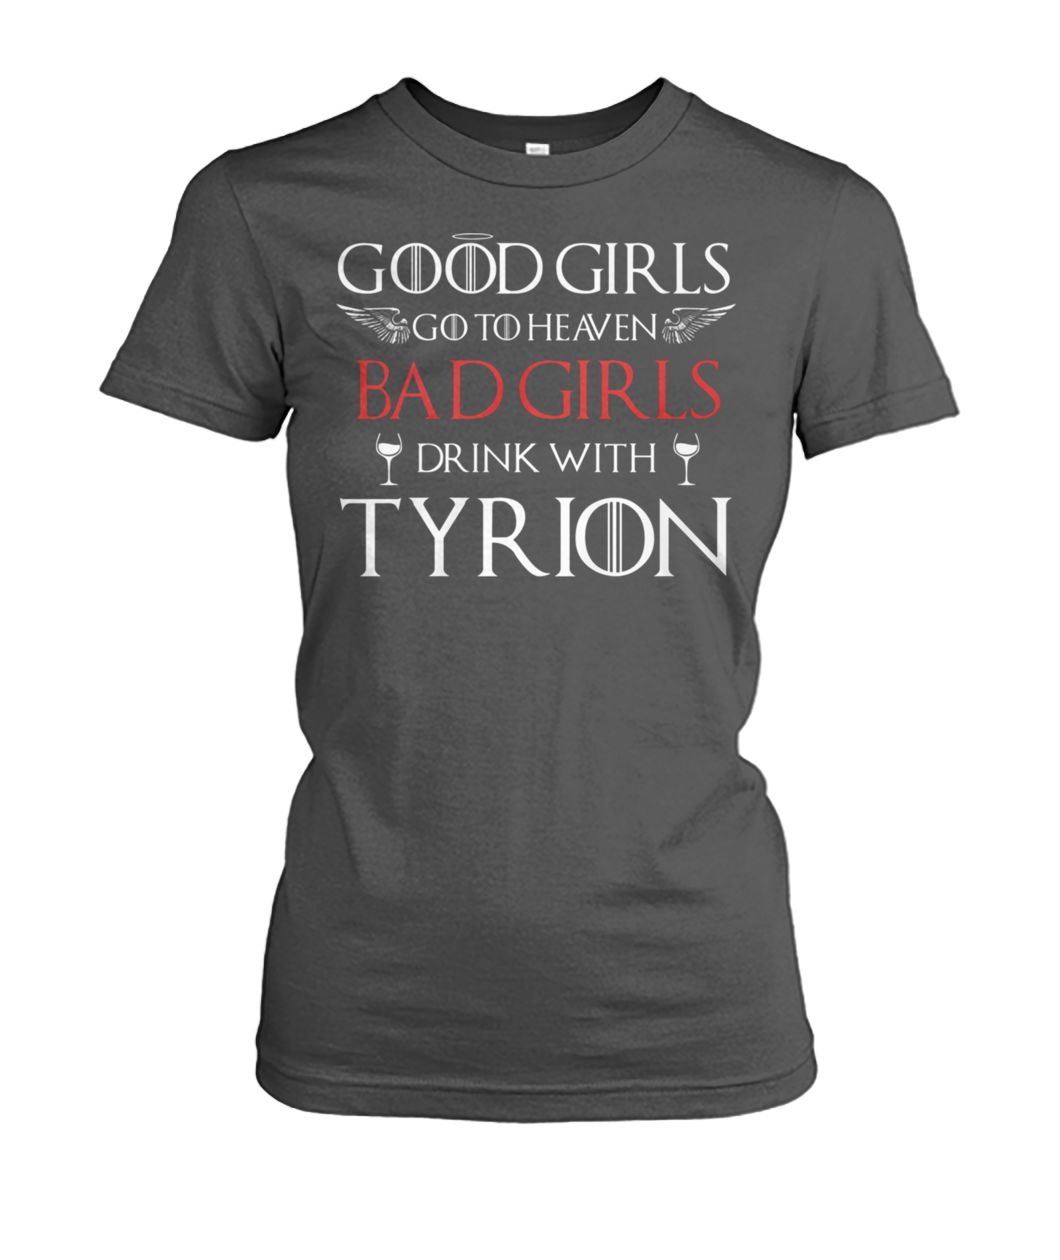 Game of thrones good girls go to the heaven bad girls drink with tyrion women's crew tee